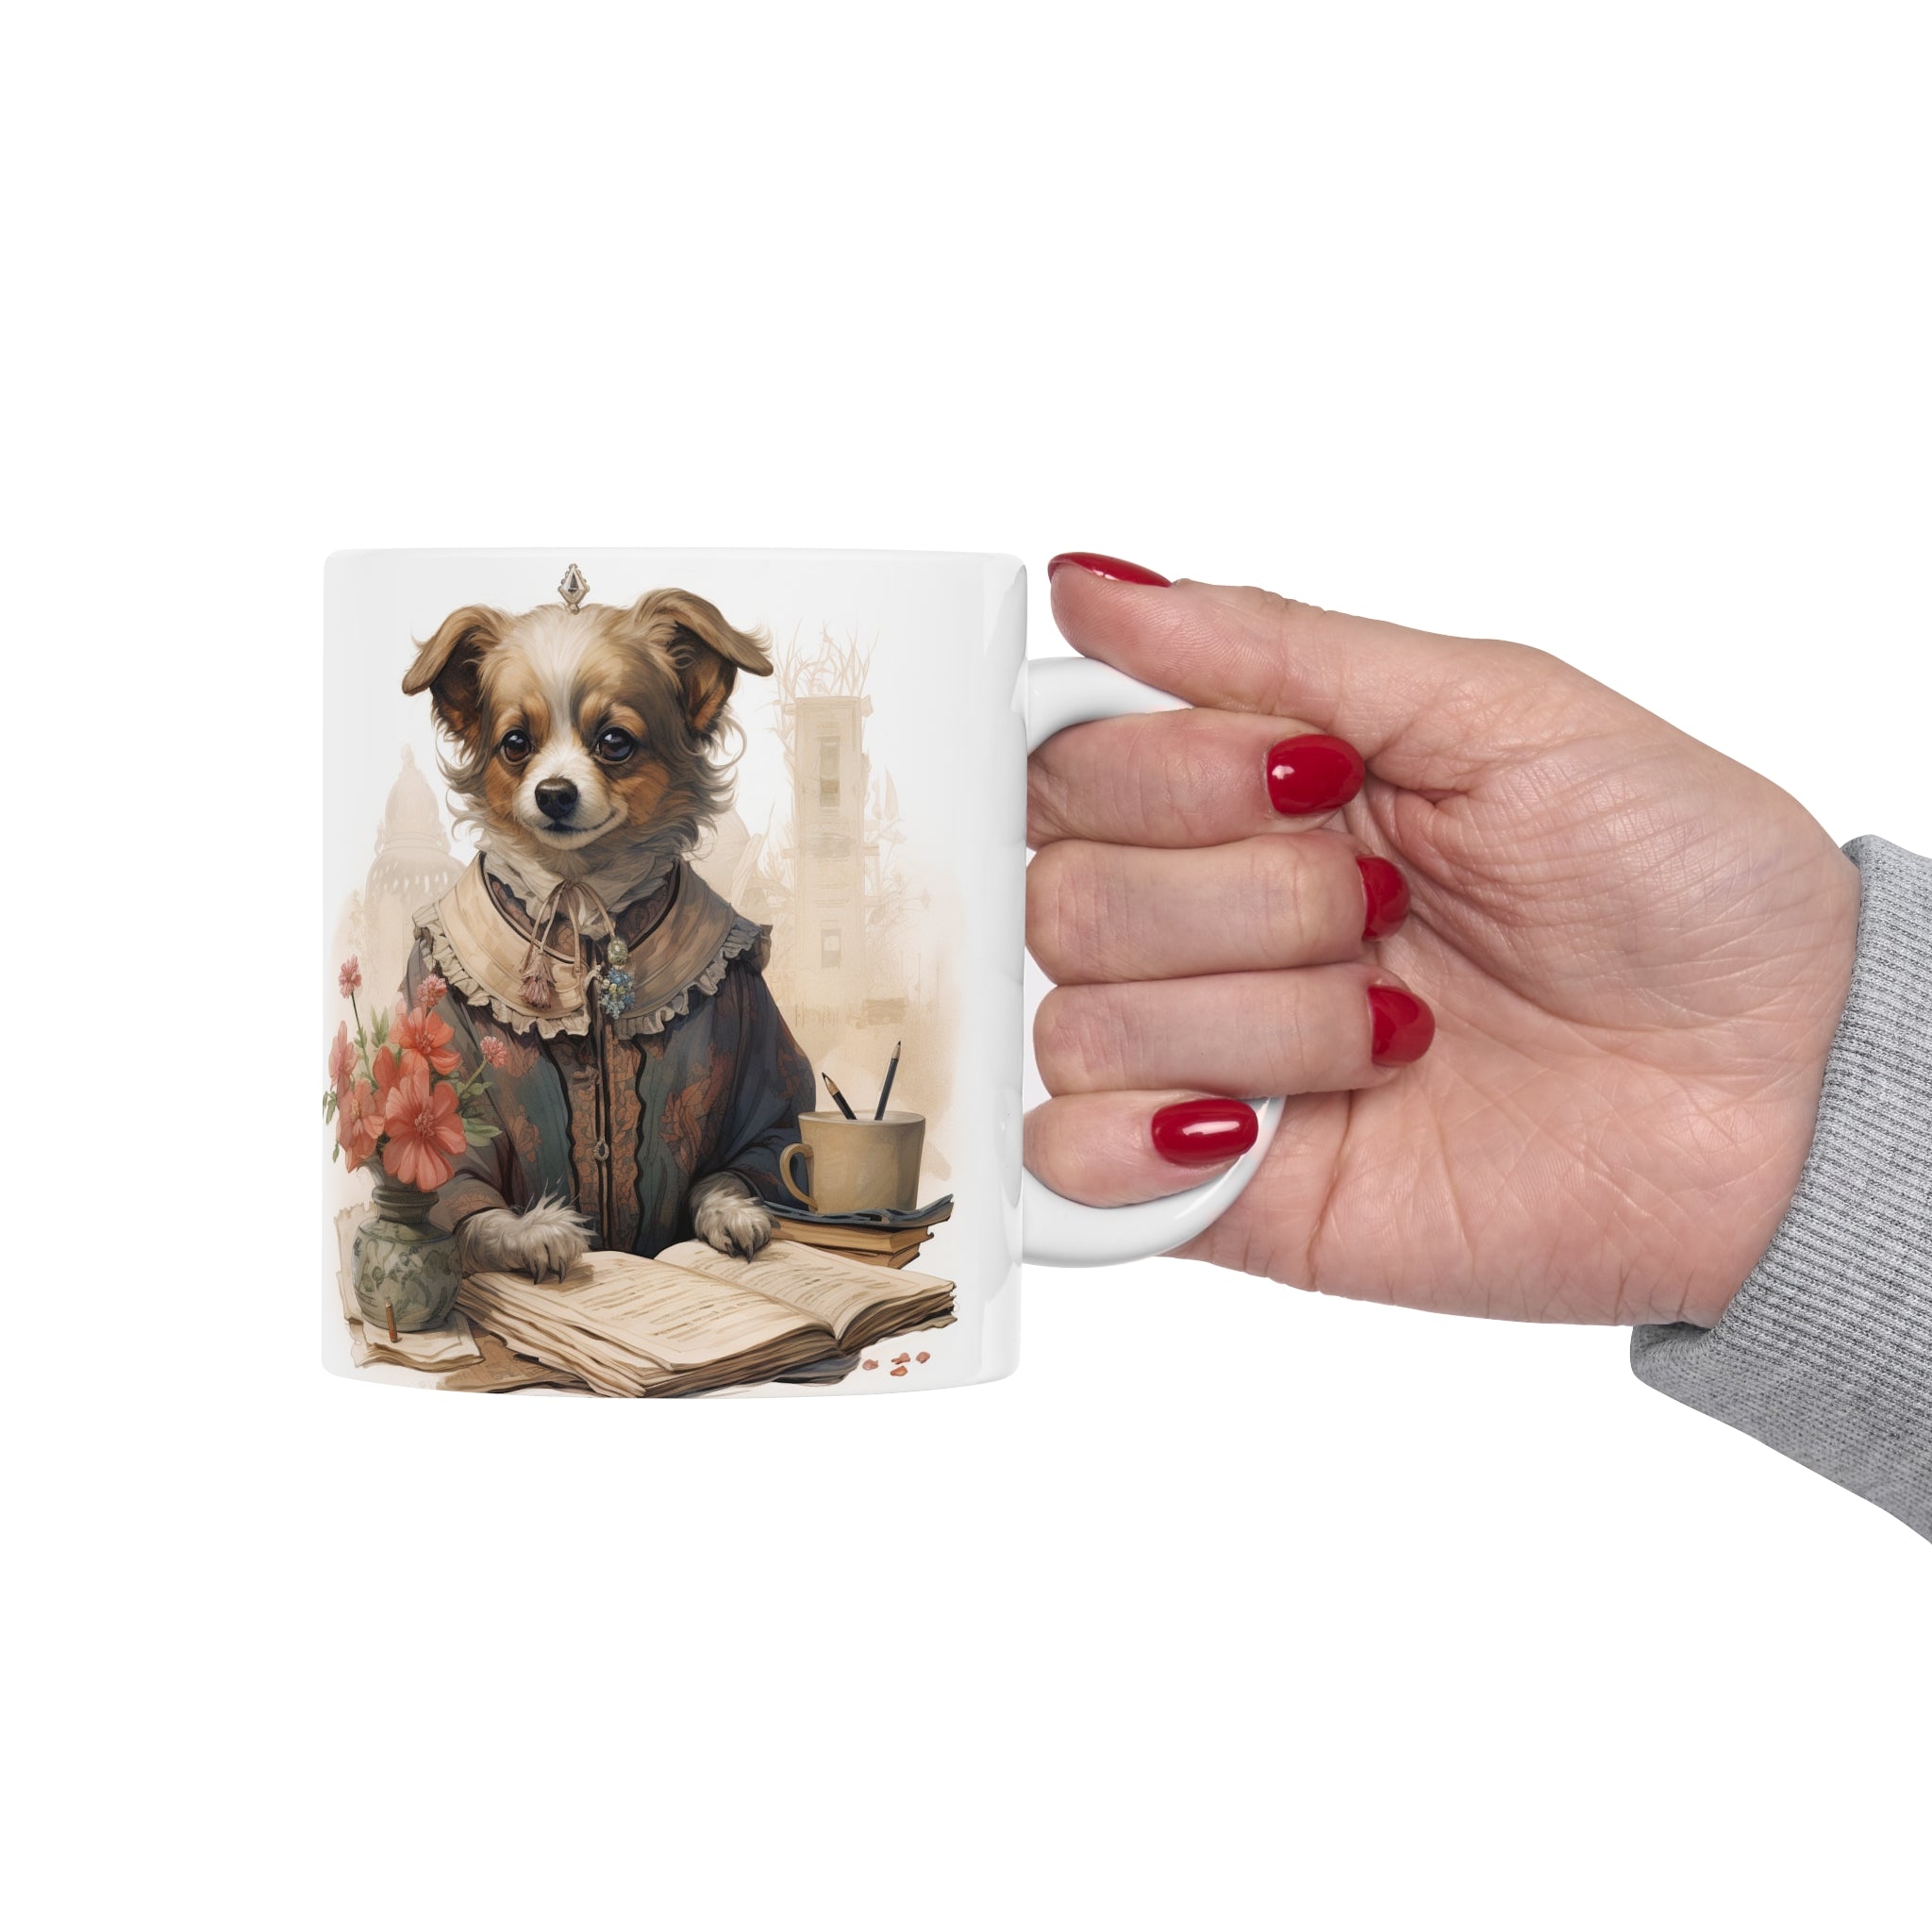 Gift for Mothers on Mother's Day: Relaxing Garden Pet 11oz Ceramic Mug | Exclusive Floral Doggy Design | Professional Artwork | Durable & Aesthetic Drinkware